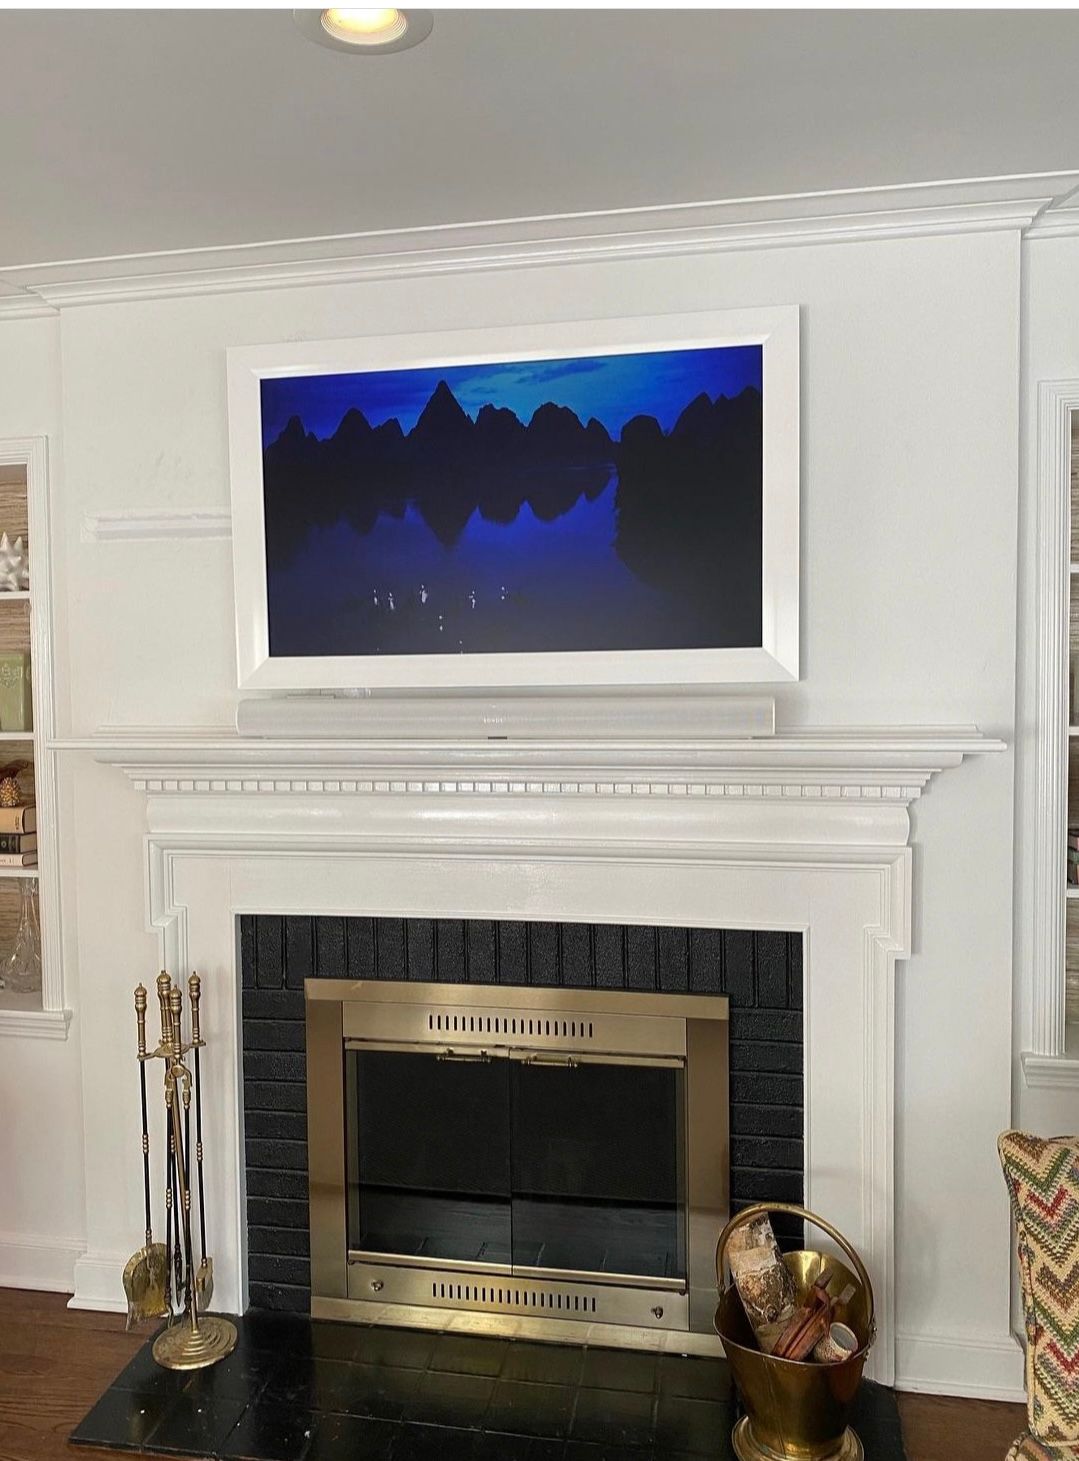 Frame TV mounted over fireplace by Yonkers TV Mounting Service.